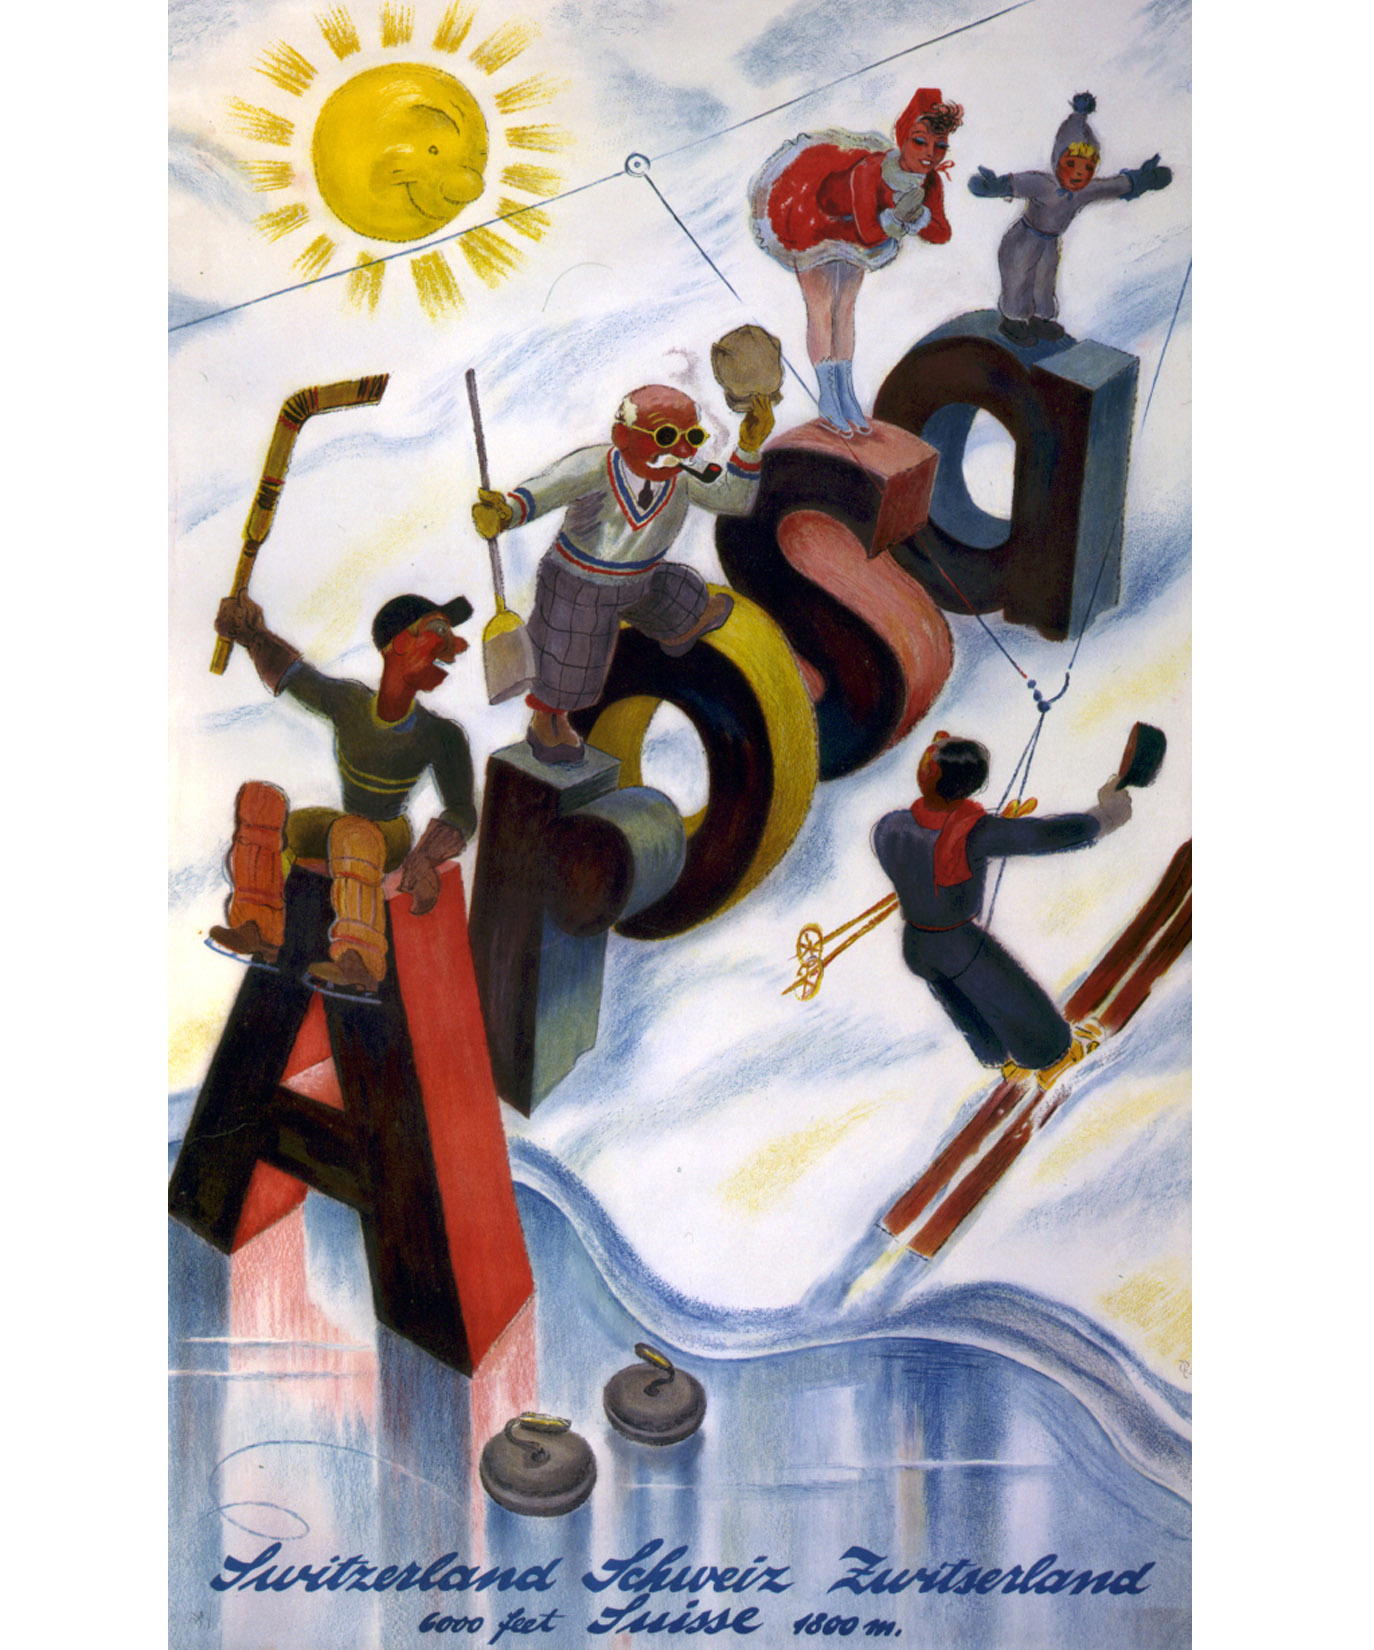 A 1938 promotional poster showing the many types of winter sports available in Arosa, Switzerland: Ice hockey, ice skating, skiing, and curling. View full size.